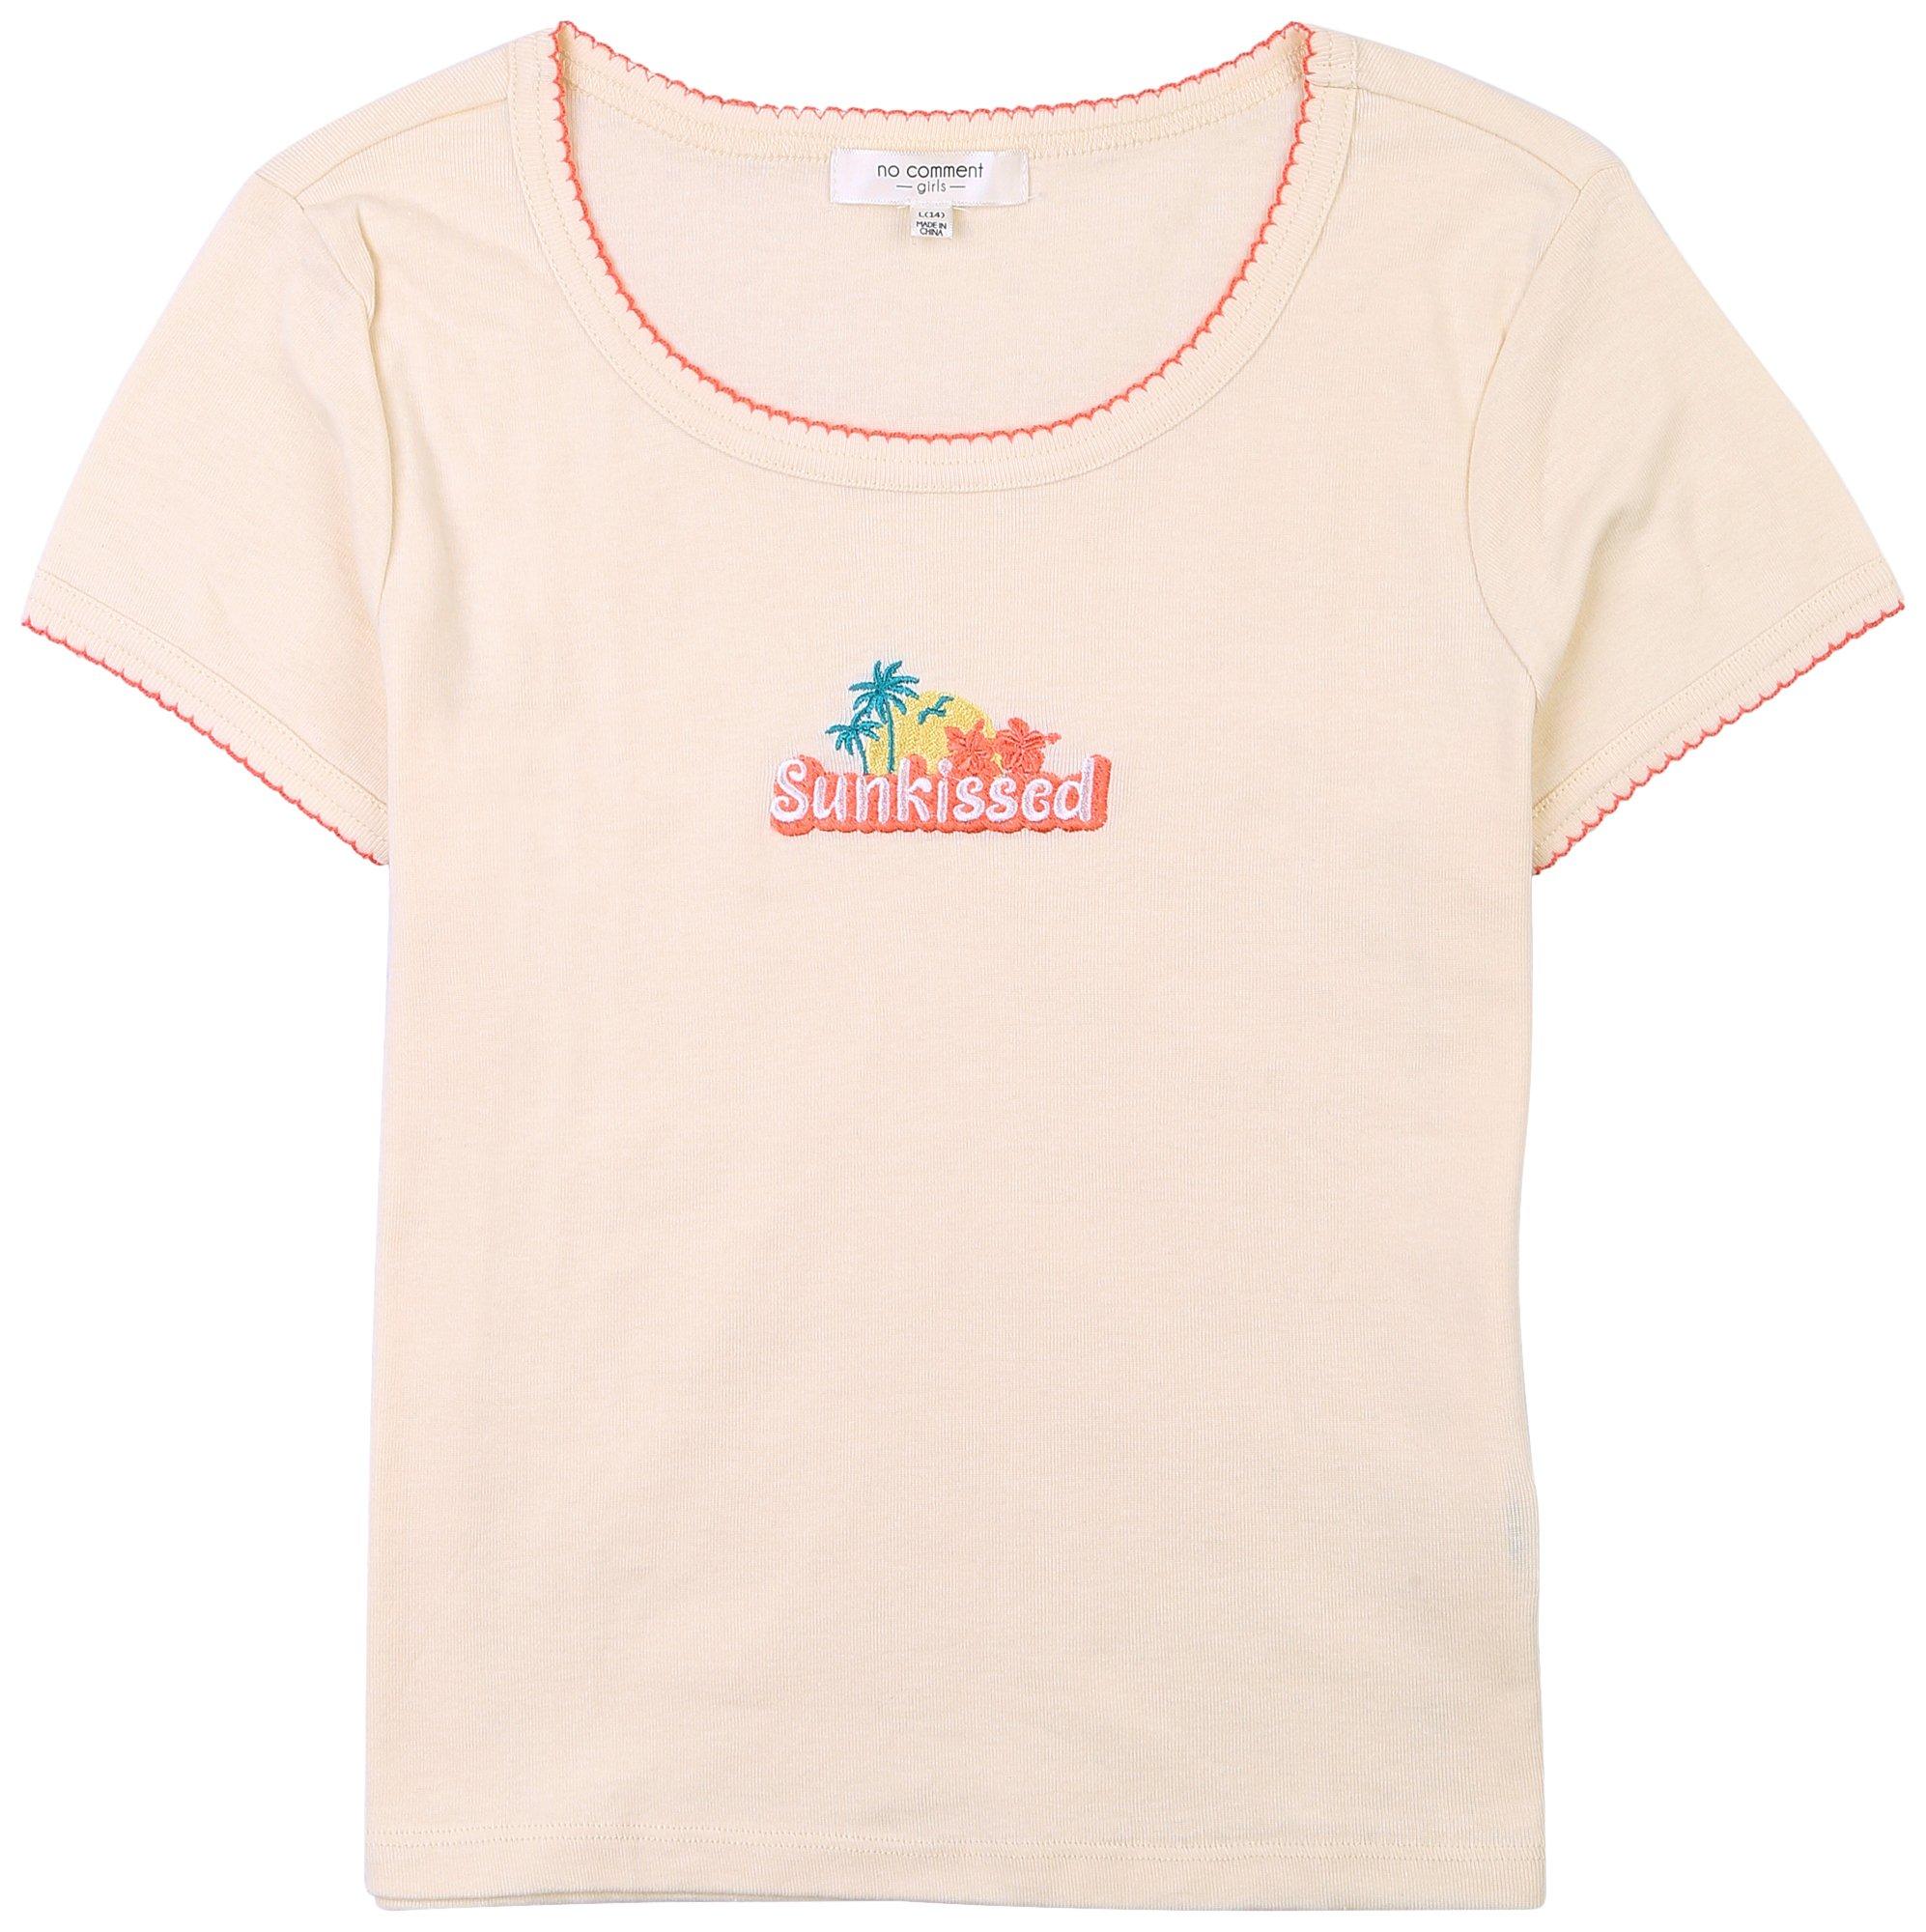 No Comment Big Girls Sunkissed Short Sleeve Top